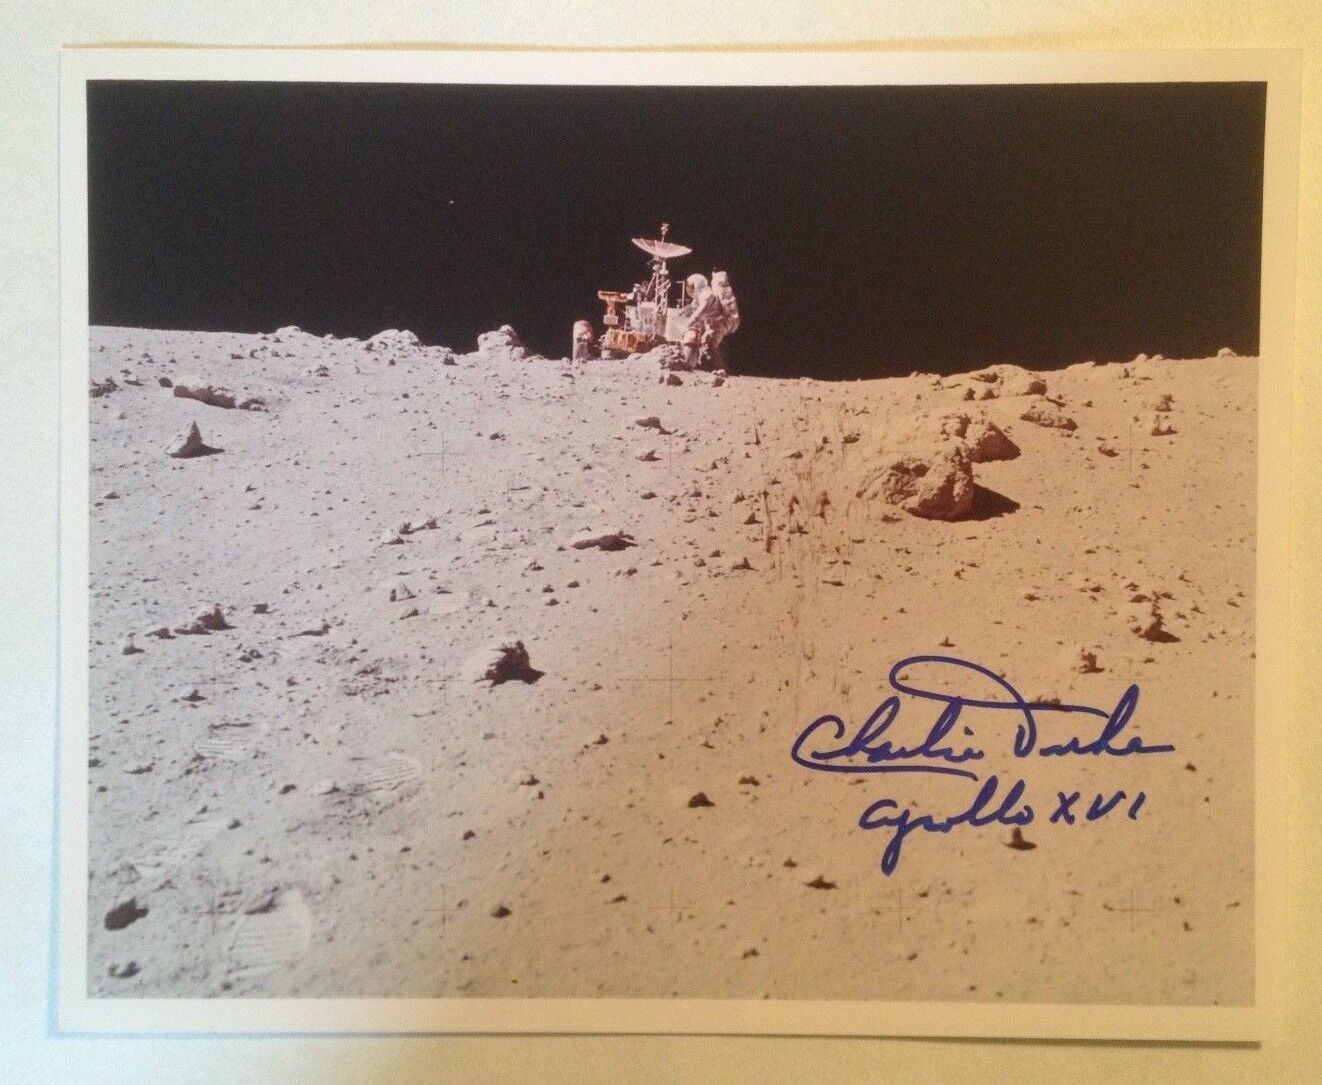 Astronaut Charlie Duke Signed Photograph on the Moon with Lander (Apollo 16)